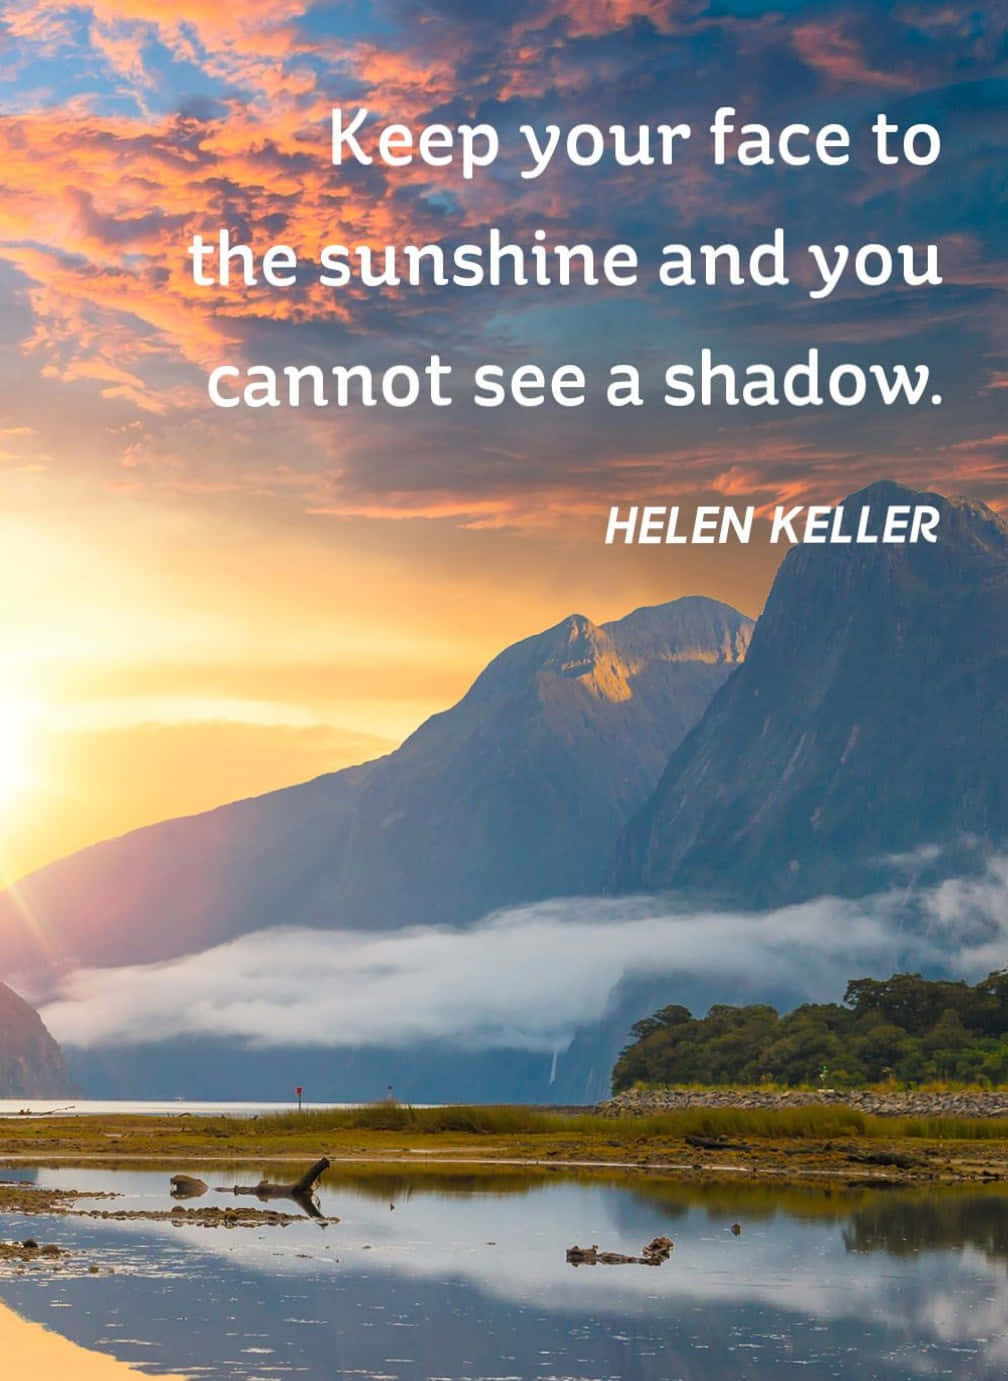 Keep Your Face To The Sunshine And You Cannot See A Shadow Helen Keller